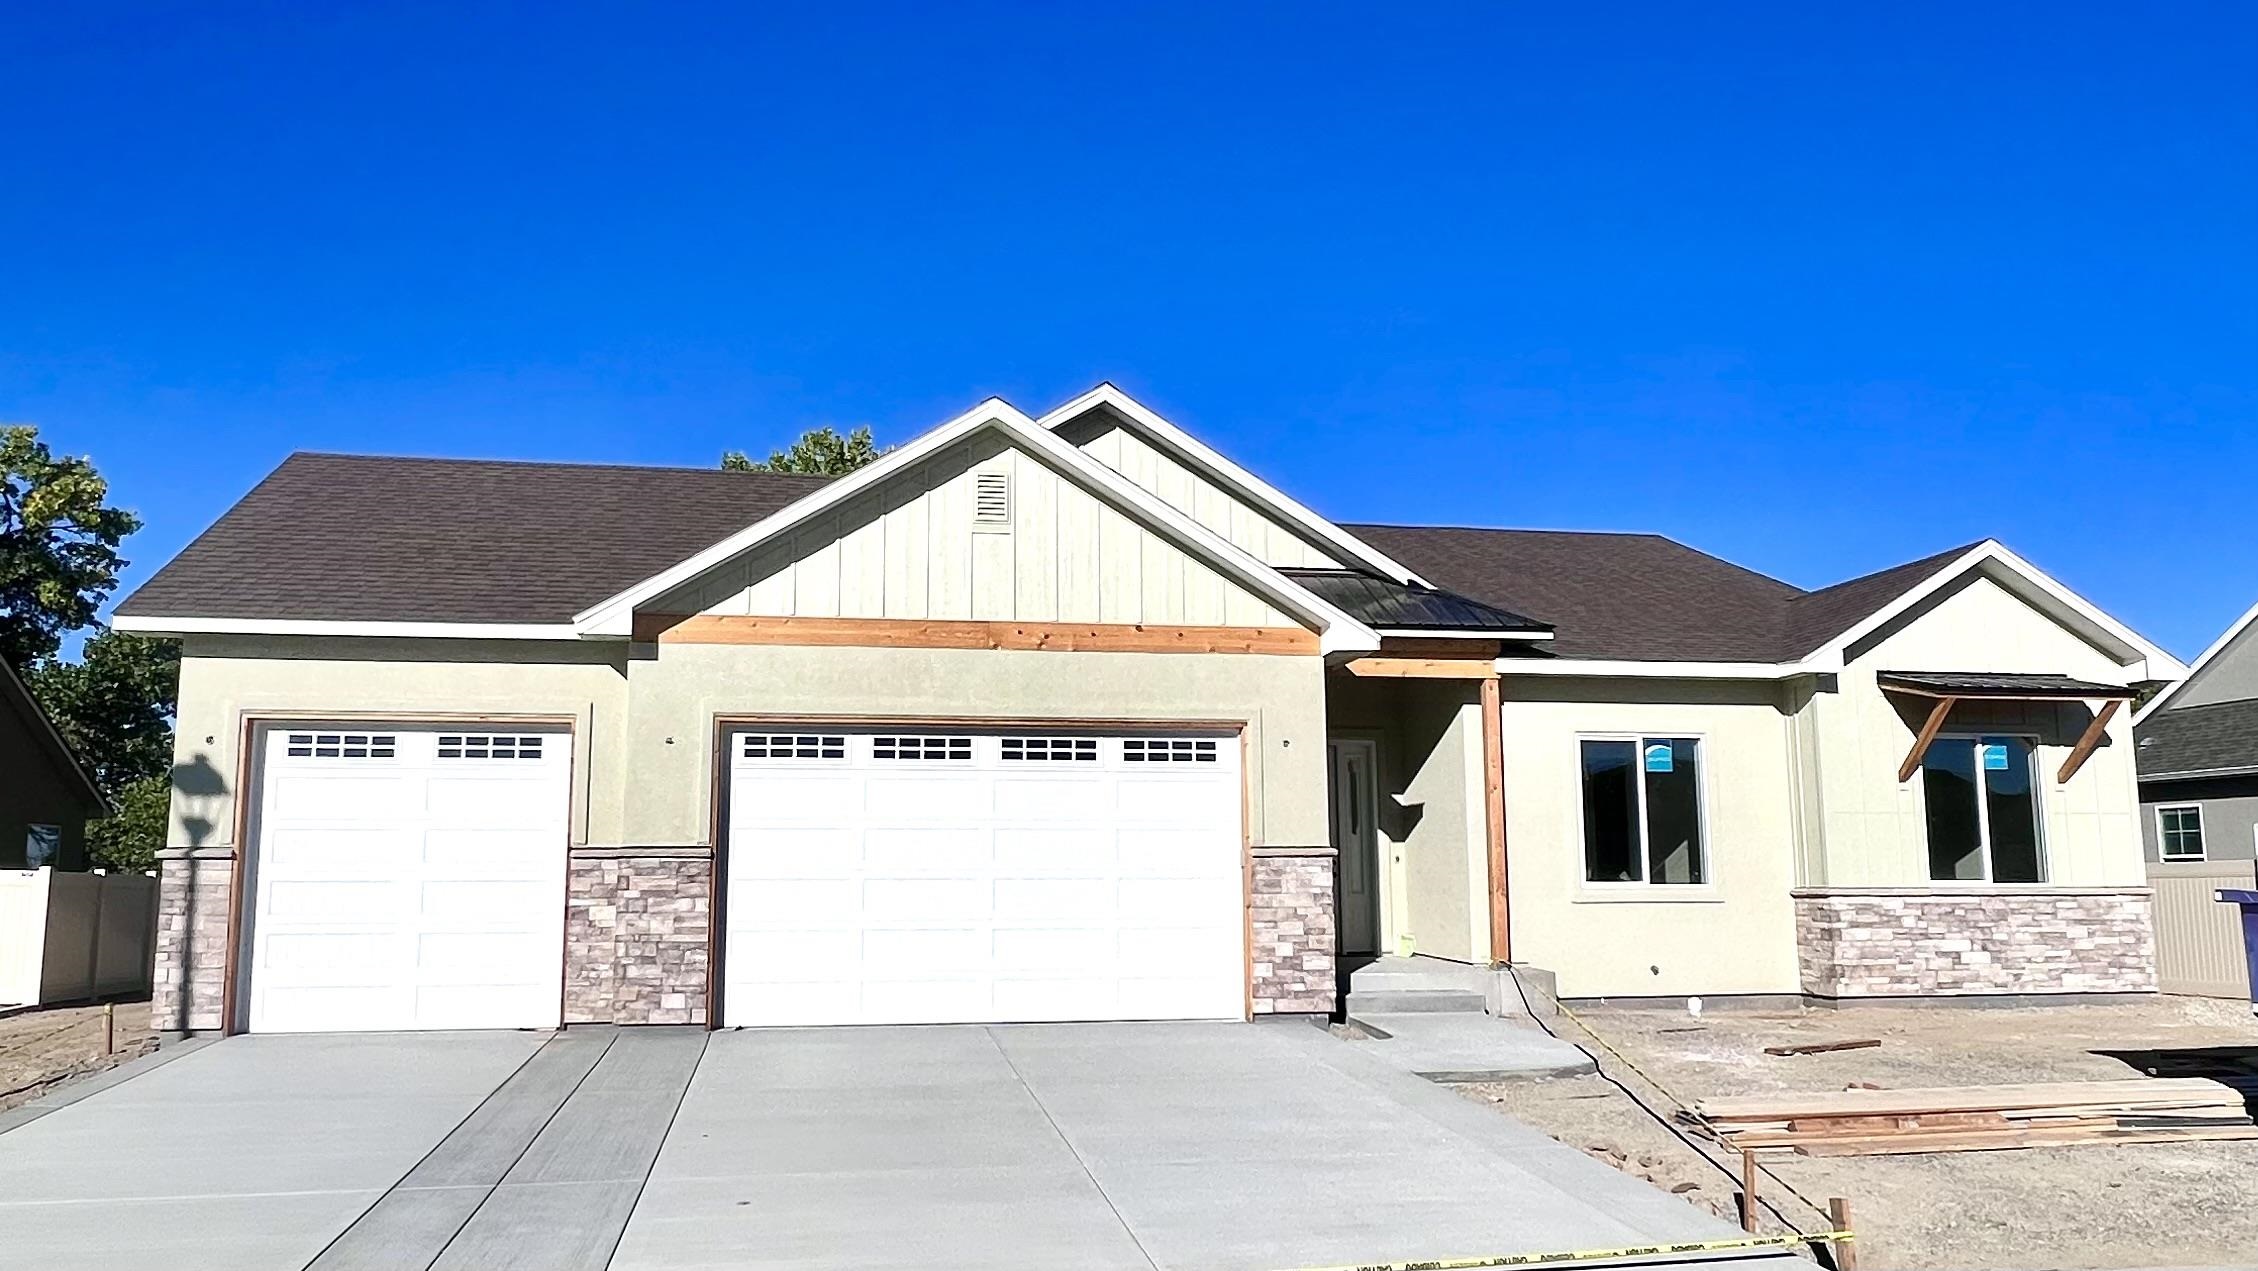 This stunning new build is a MUST SEE! Located in the desirable Orchard Ridge subdivision just minutes from downtown Fruita.  Spacious, premium view lot with room for RV parking, backing to open field bordered with mature trees. Boasting a wonderful 4 bedroom, 3 bath floorplan with beautiful custom finishes and a fabulous kitchen and pantry!  Beautiful, engineered hardwood floors, custom tile, and designer light fixtures.  Extra tall ceilings and doors throughout, along with  9' Garage doors to accommodate large trucks and cars.  This home is also heated with the new, wonderfully efficient, Heat Recovery System.  Plus, engineer designed, extra deep stemwall for comfort and quality! All of the highest intentions, designs,  and processes, pulled together in this amazingly well built home!  All information is subject to change/error without notice. Buyer(s) to verify all.